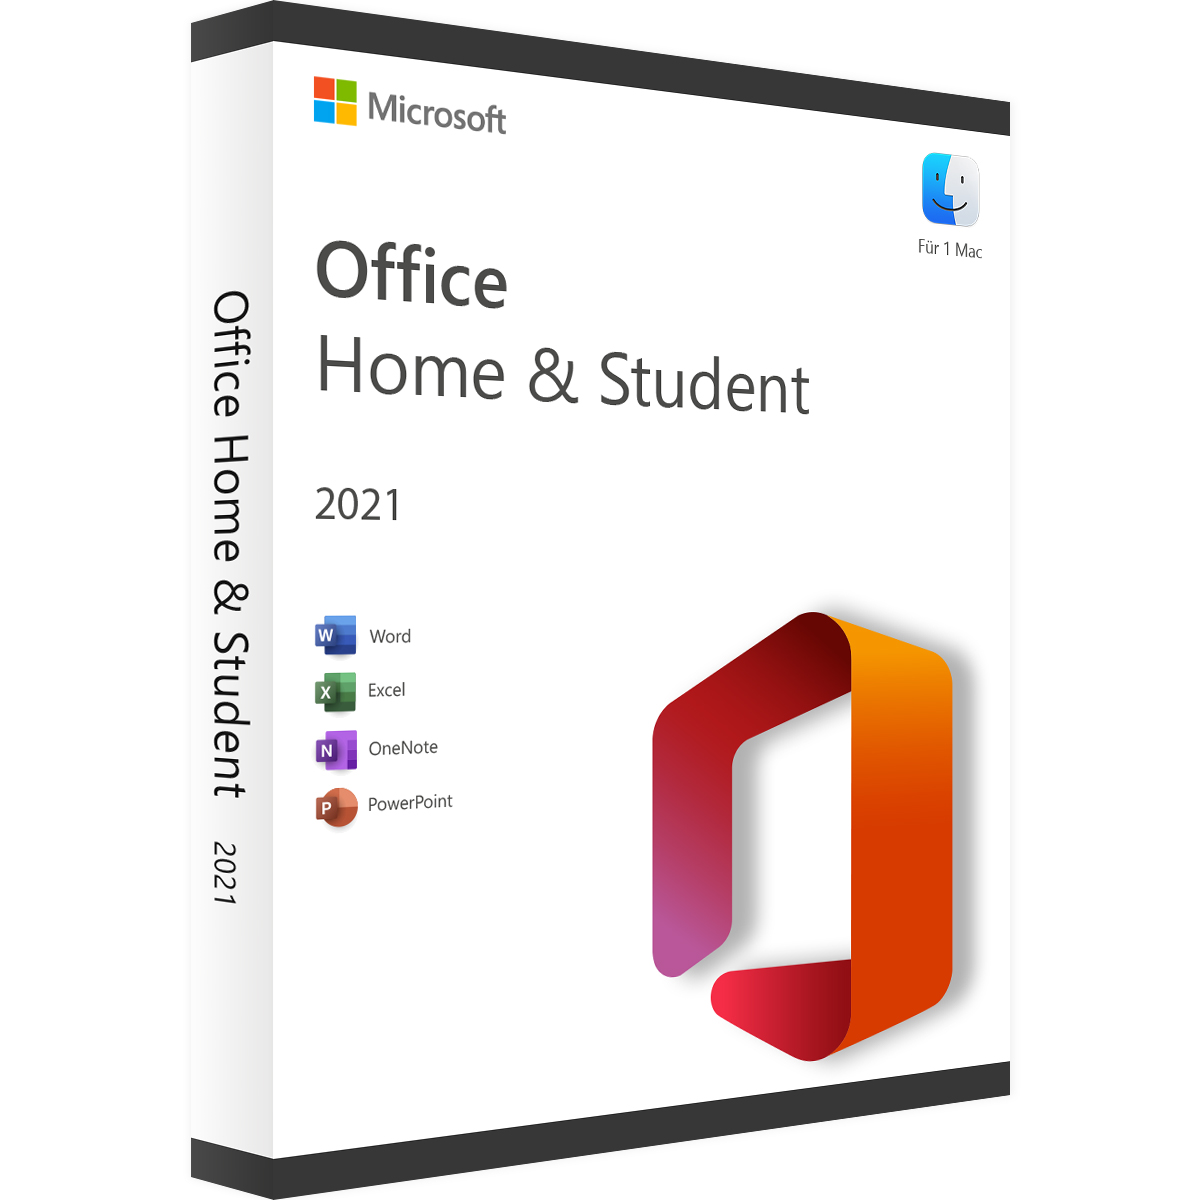 Office 2021 Home & Student for Mac